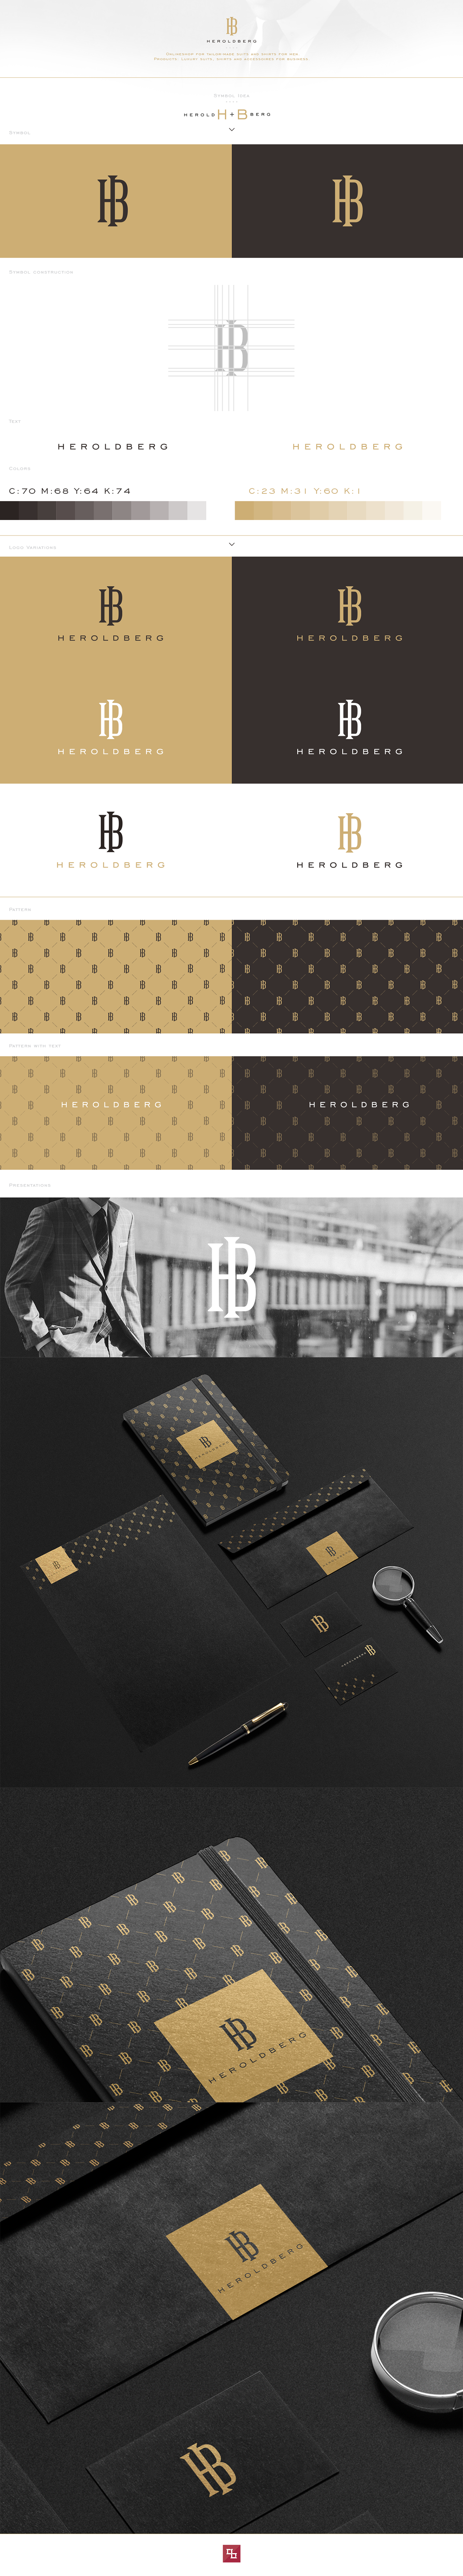 graphic luxury brand suits design Project Proposal presentation Mockup new